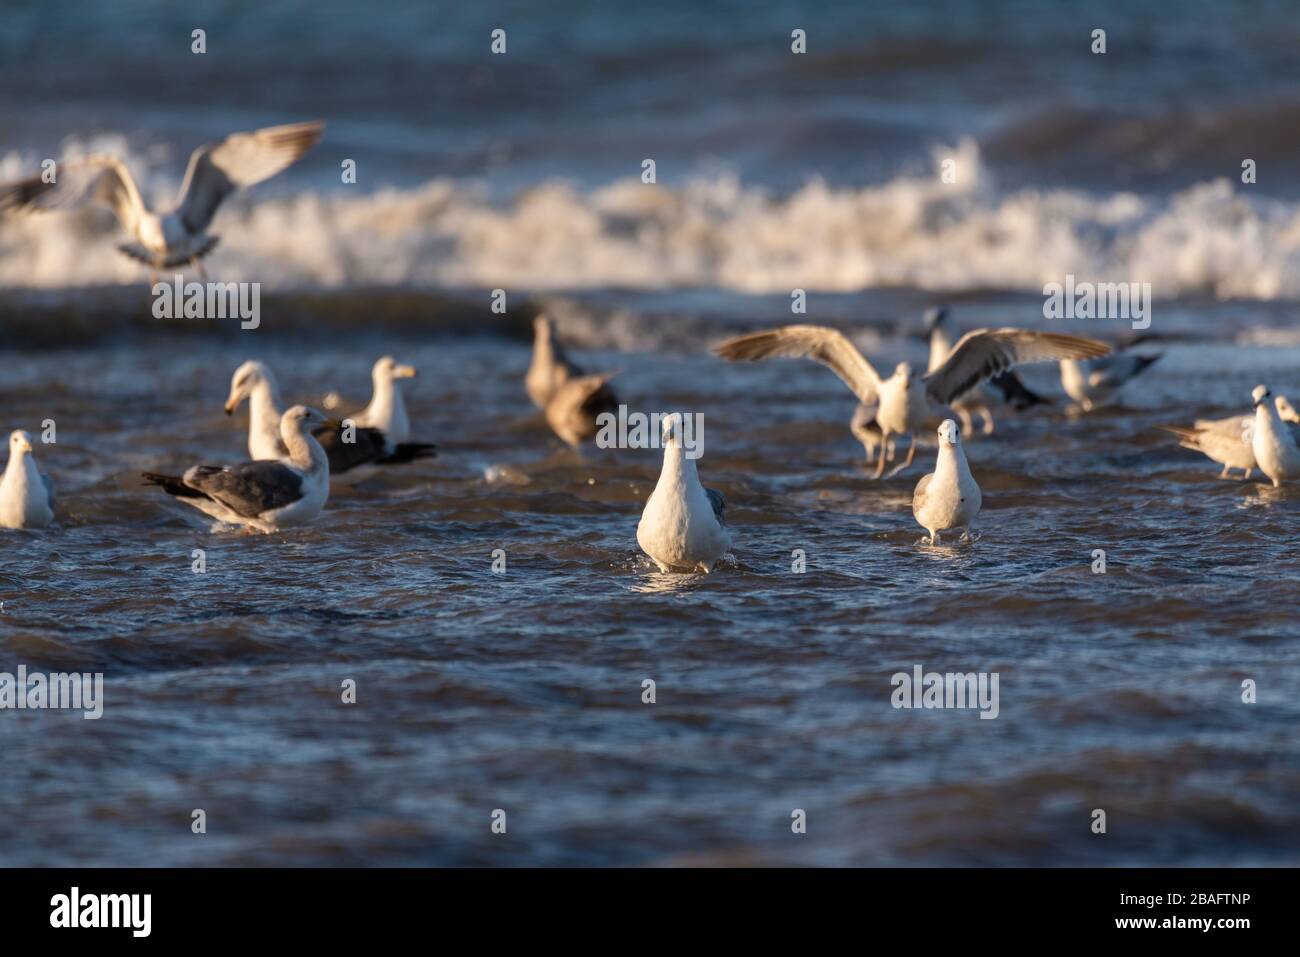 Large flock of ocean seagulls wading in same water cooperating while foraging for morning food. Stock Photo